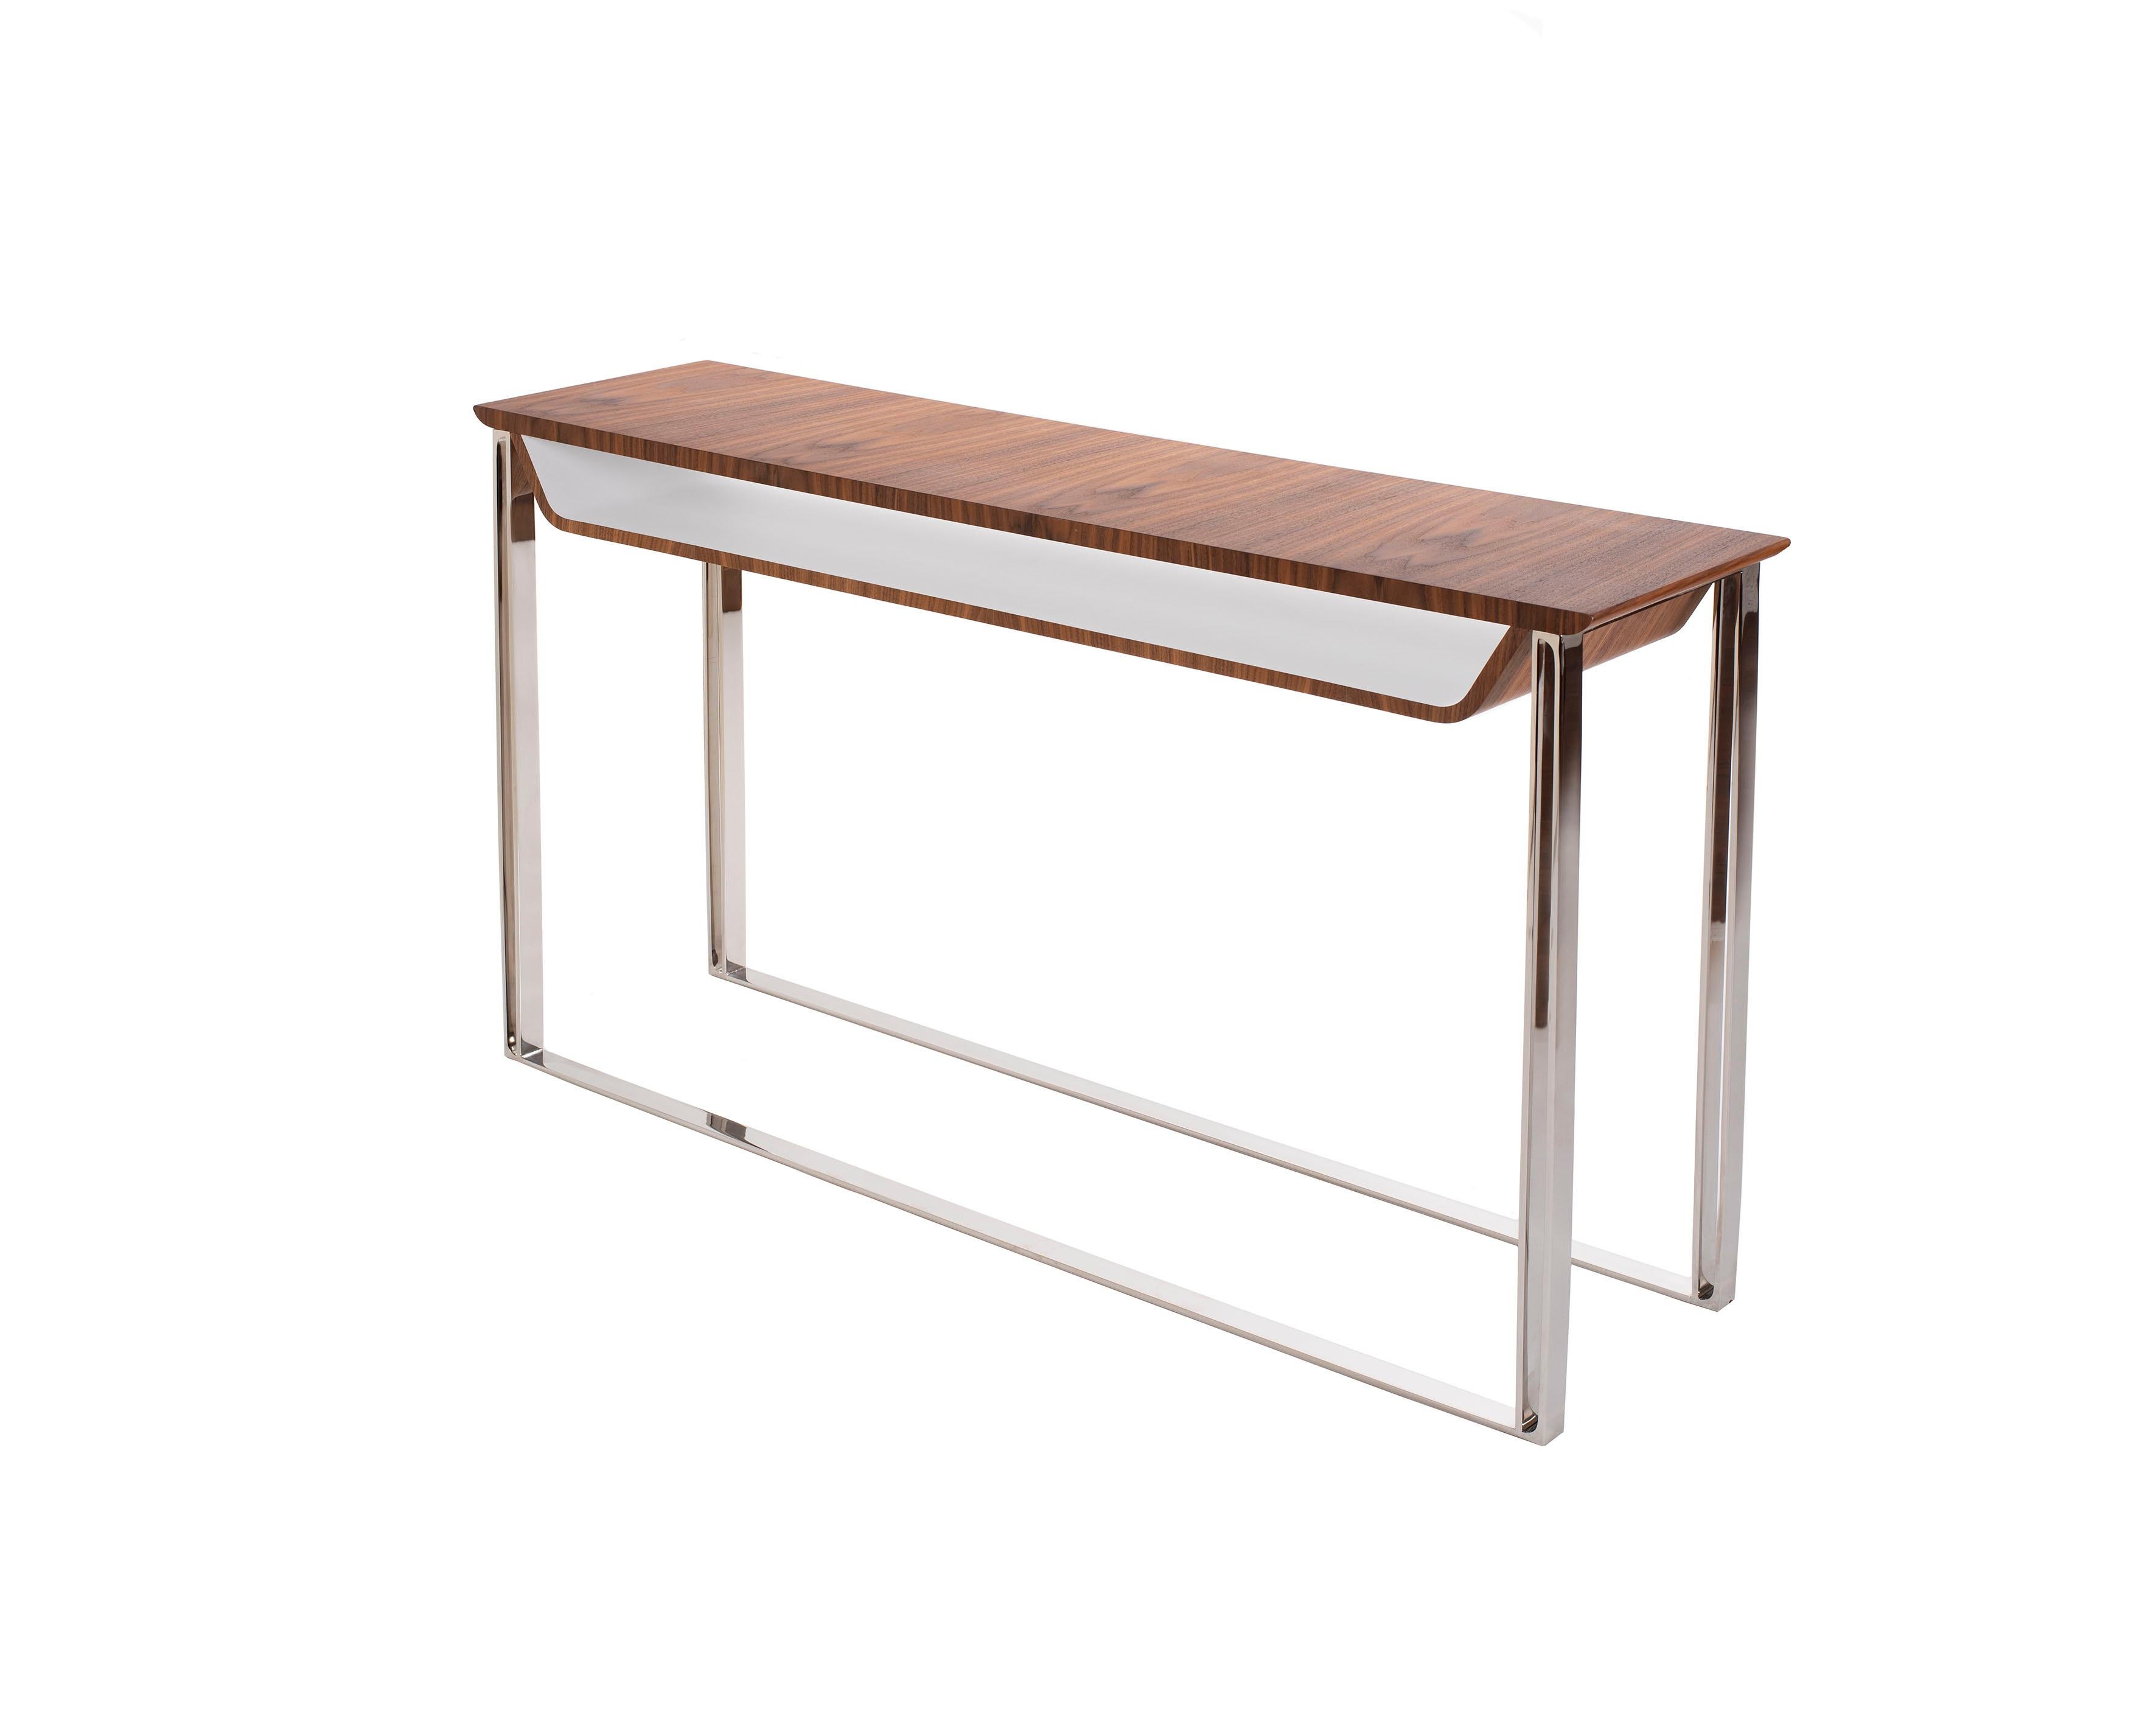 Modern Console Hey Hello Wood and Steel by Cyril Rumpler.
This is the very first line created by Cyril Rumpler, founder of Softicated, with its soft and simple, pure lines. The console is conceived as a big smile, symbol of positivity in all